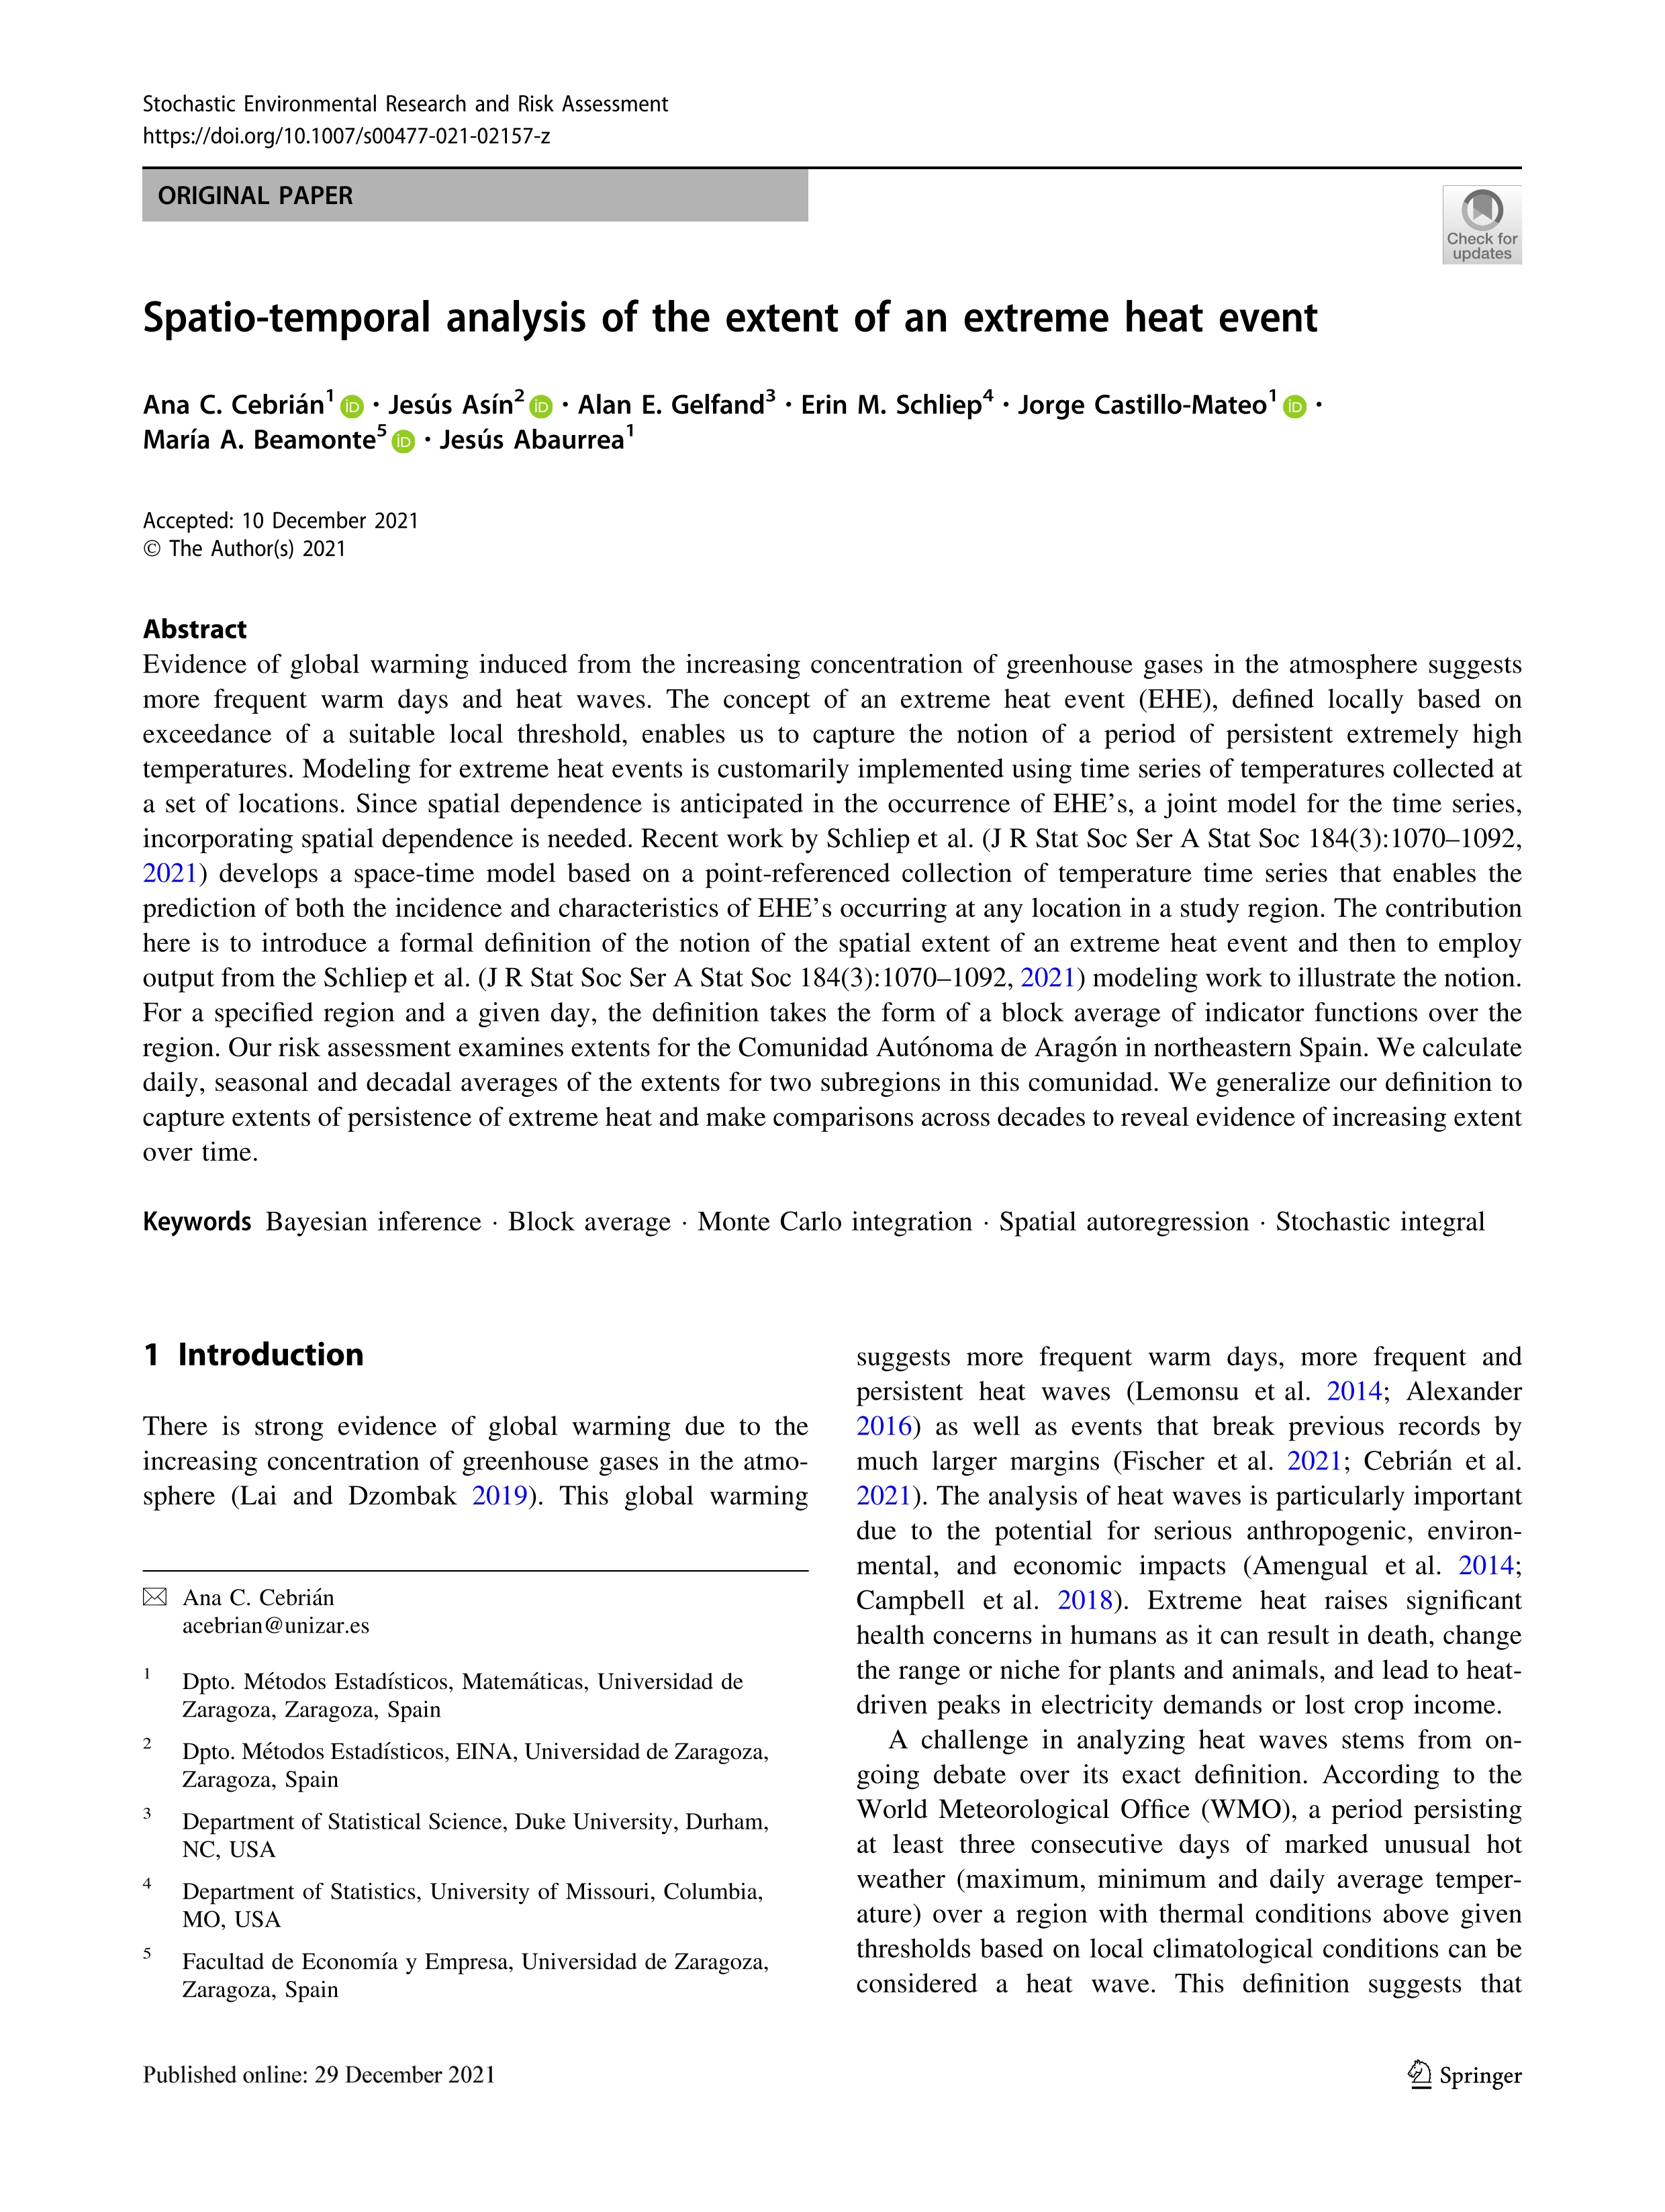 Spatio-temporal analysis of the extent of an extreme heat event